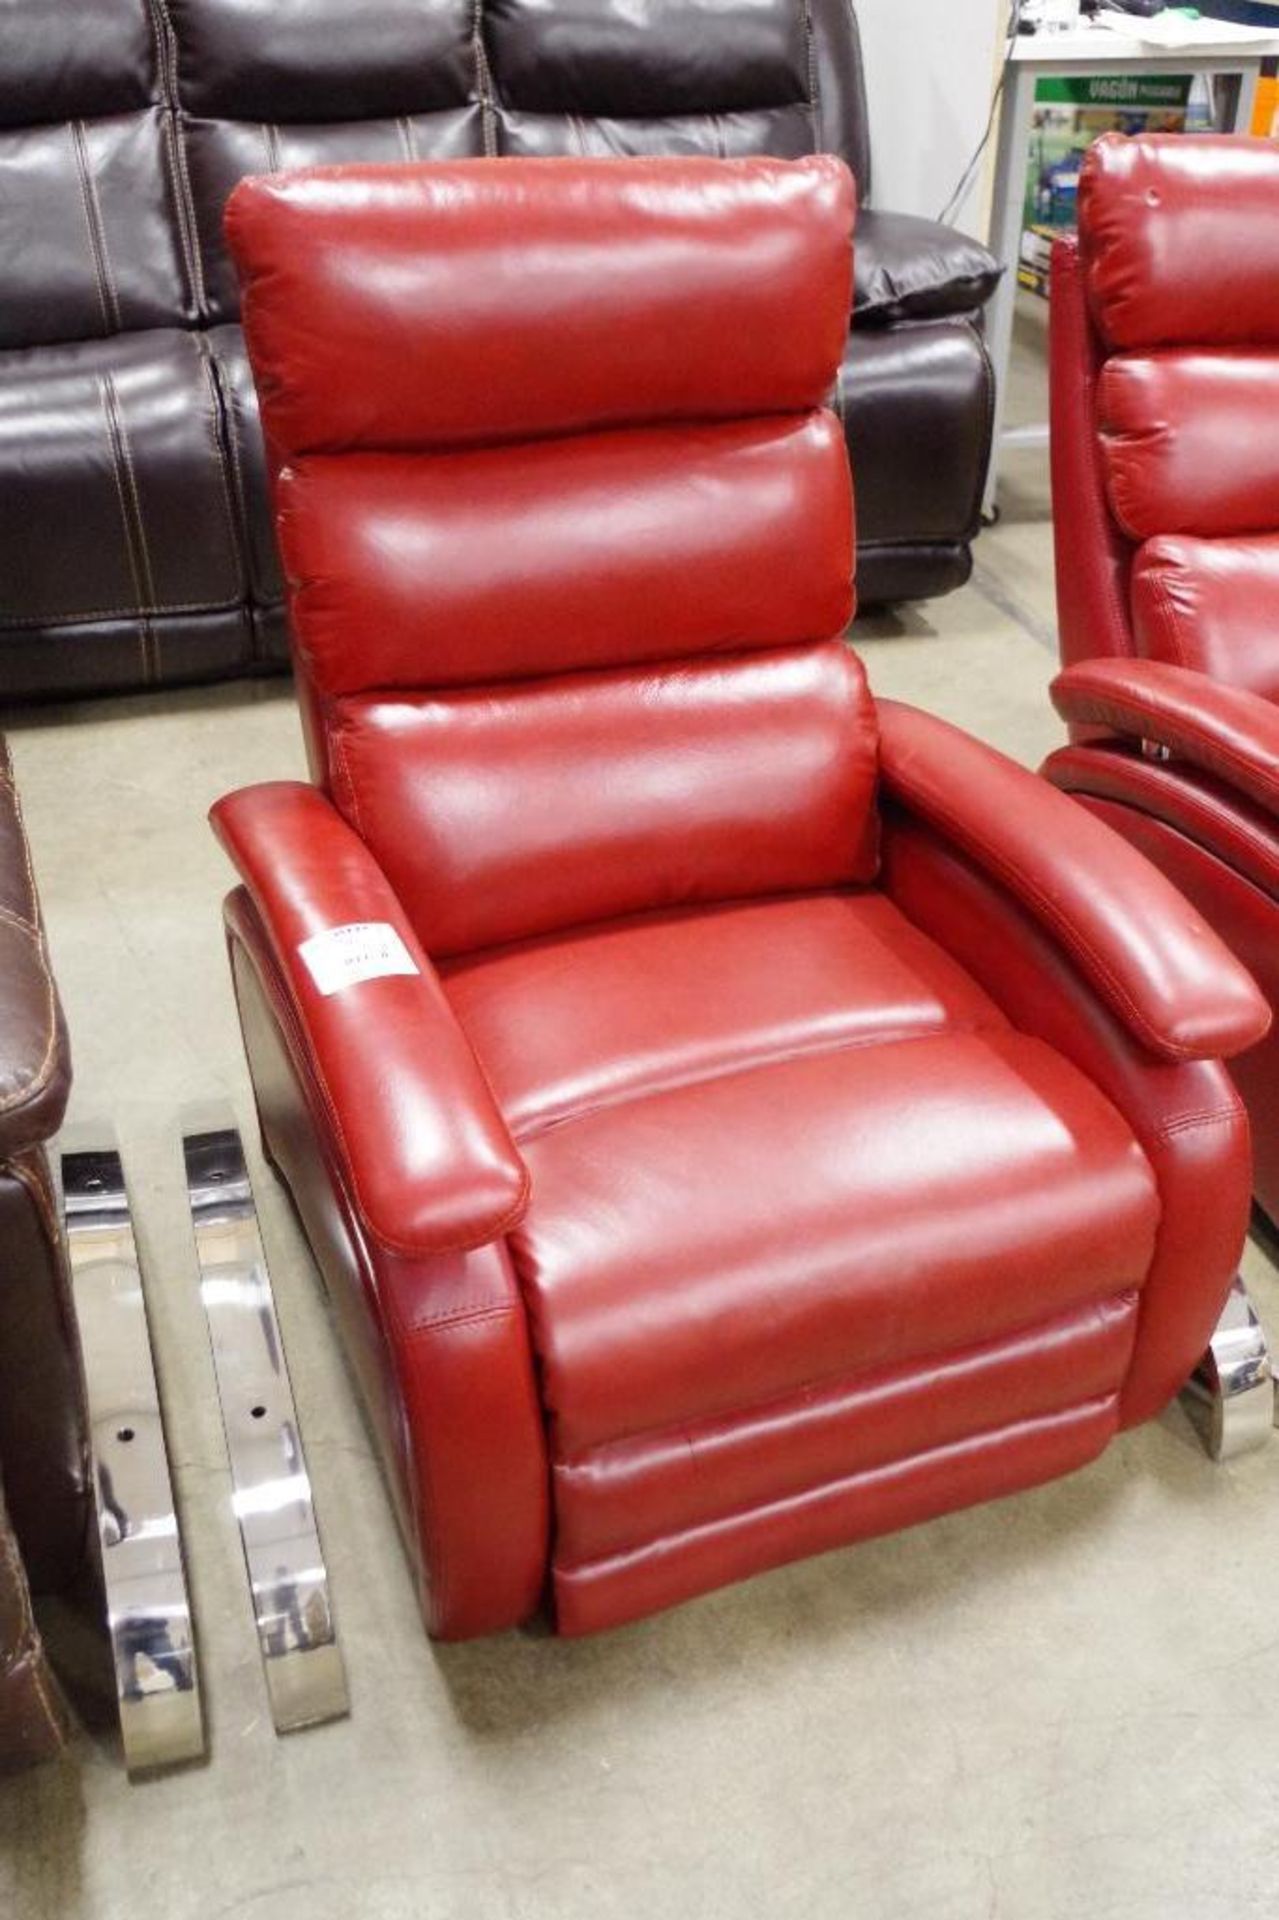 BARCALOUNGER PEGASUS Red Leather Recliner Wholesale Price: $400 each - Image 3 of 4